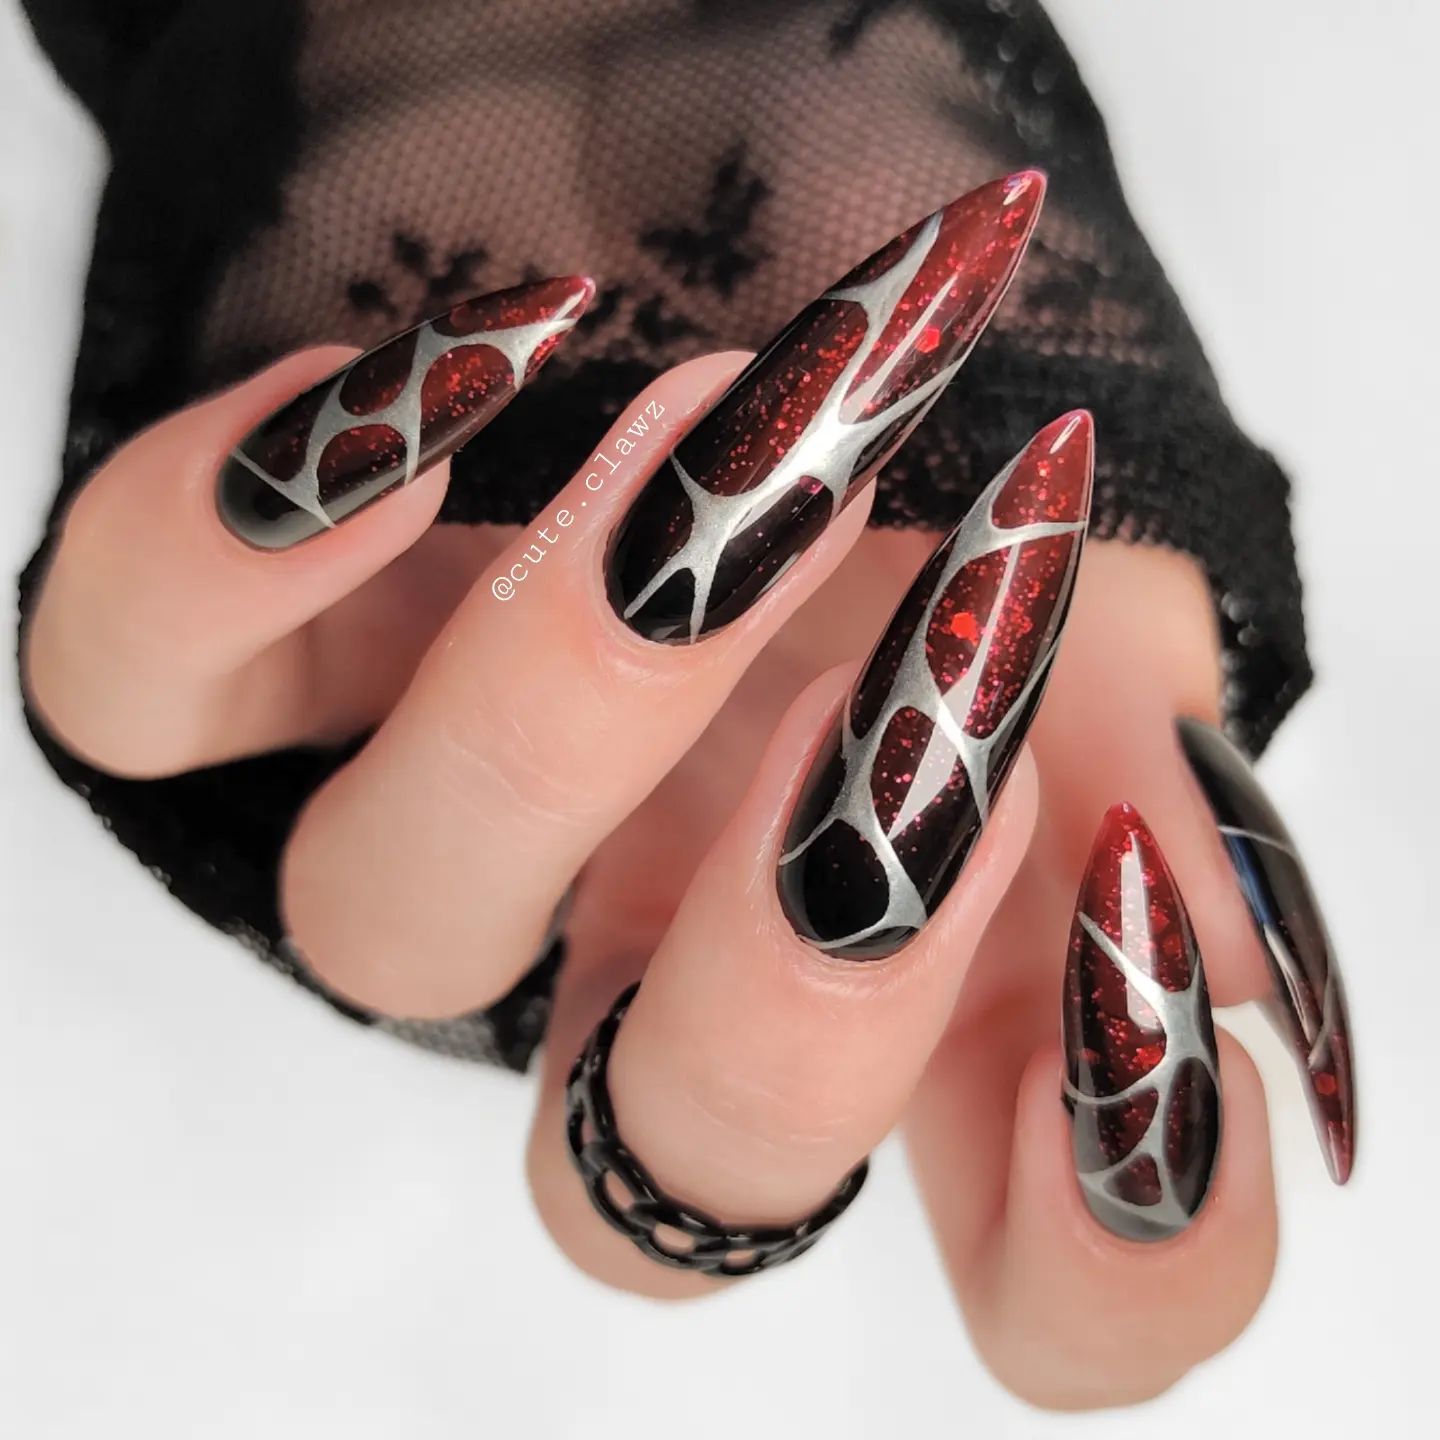 It is so cool! These nails give a bit dark spiderman vibes with the dark red and the weblike silver. The glitters behind are adorable, too. You have to go for it.